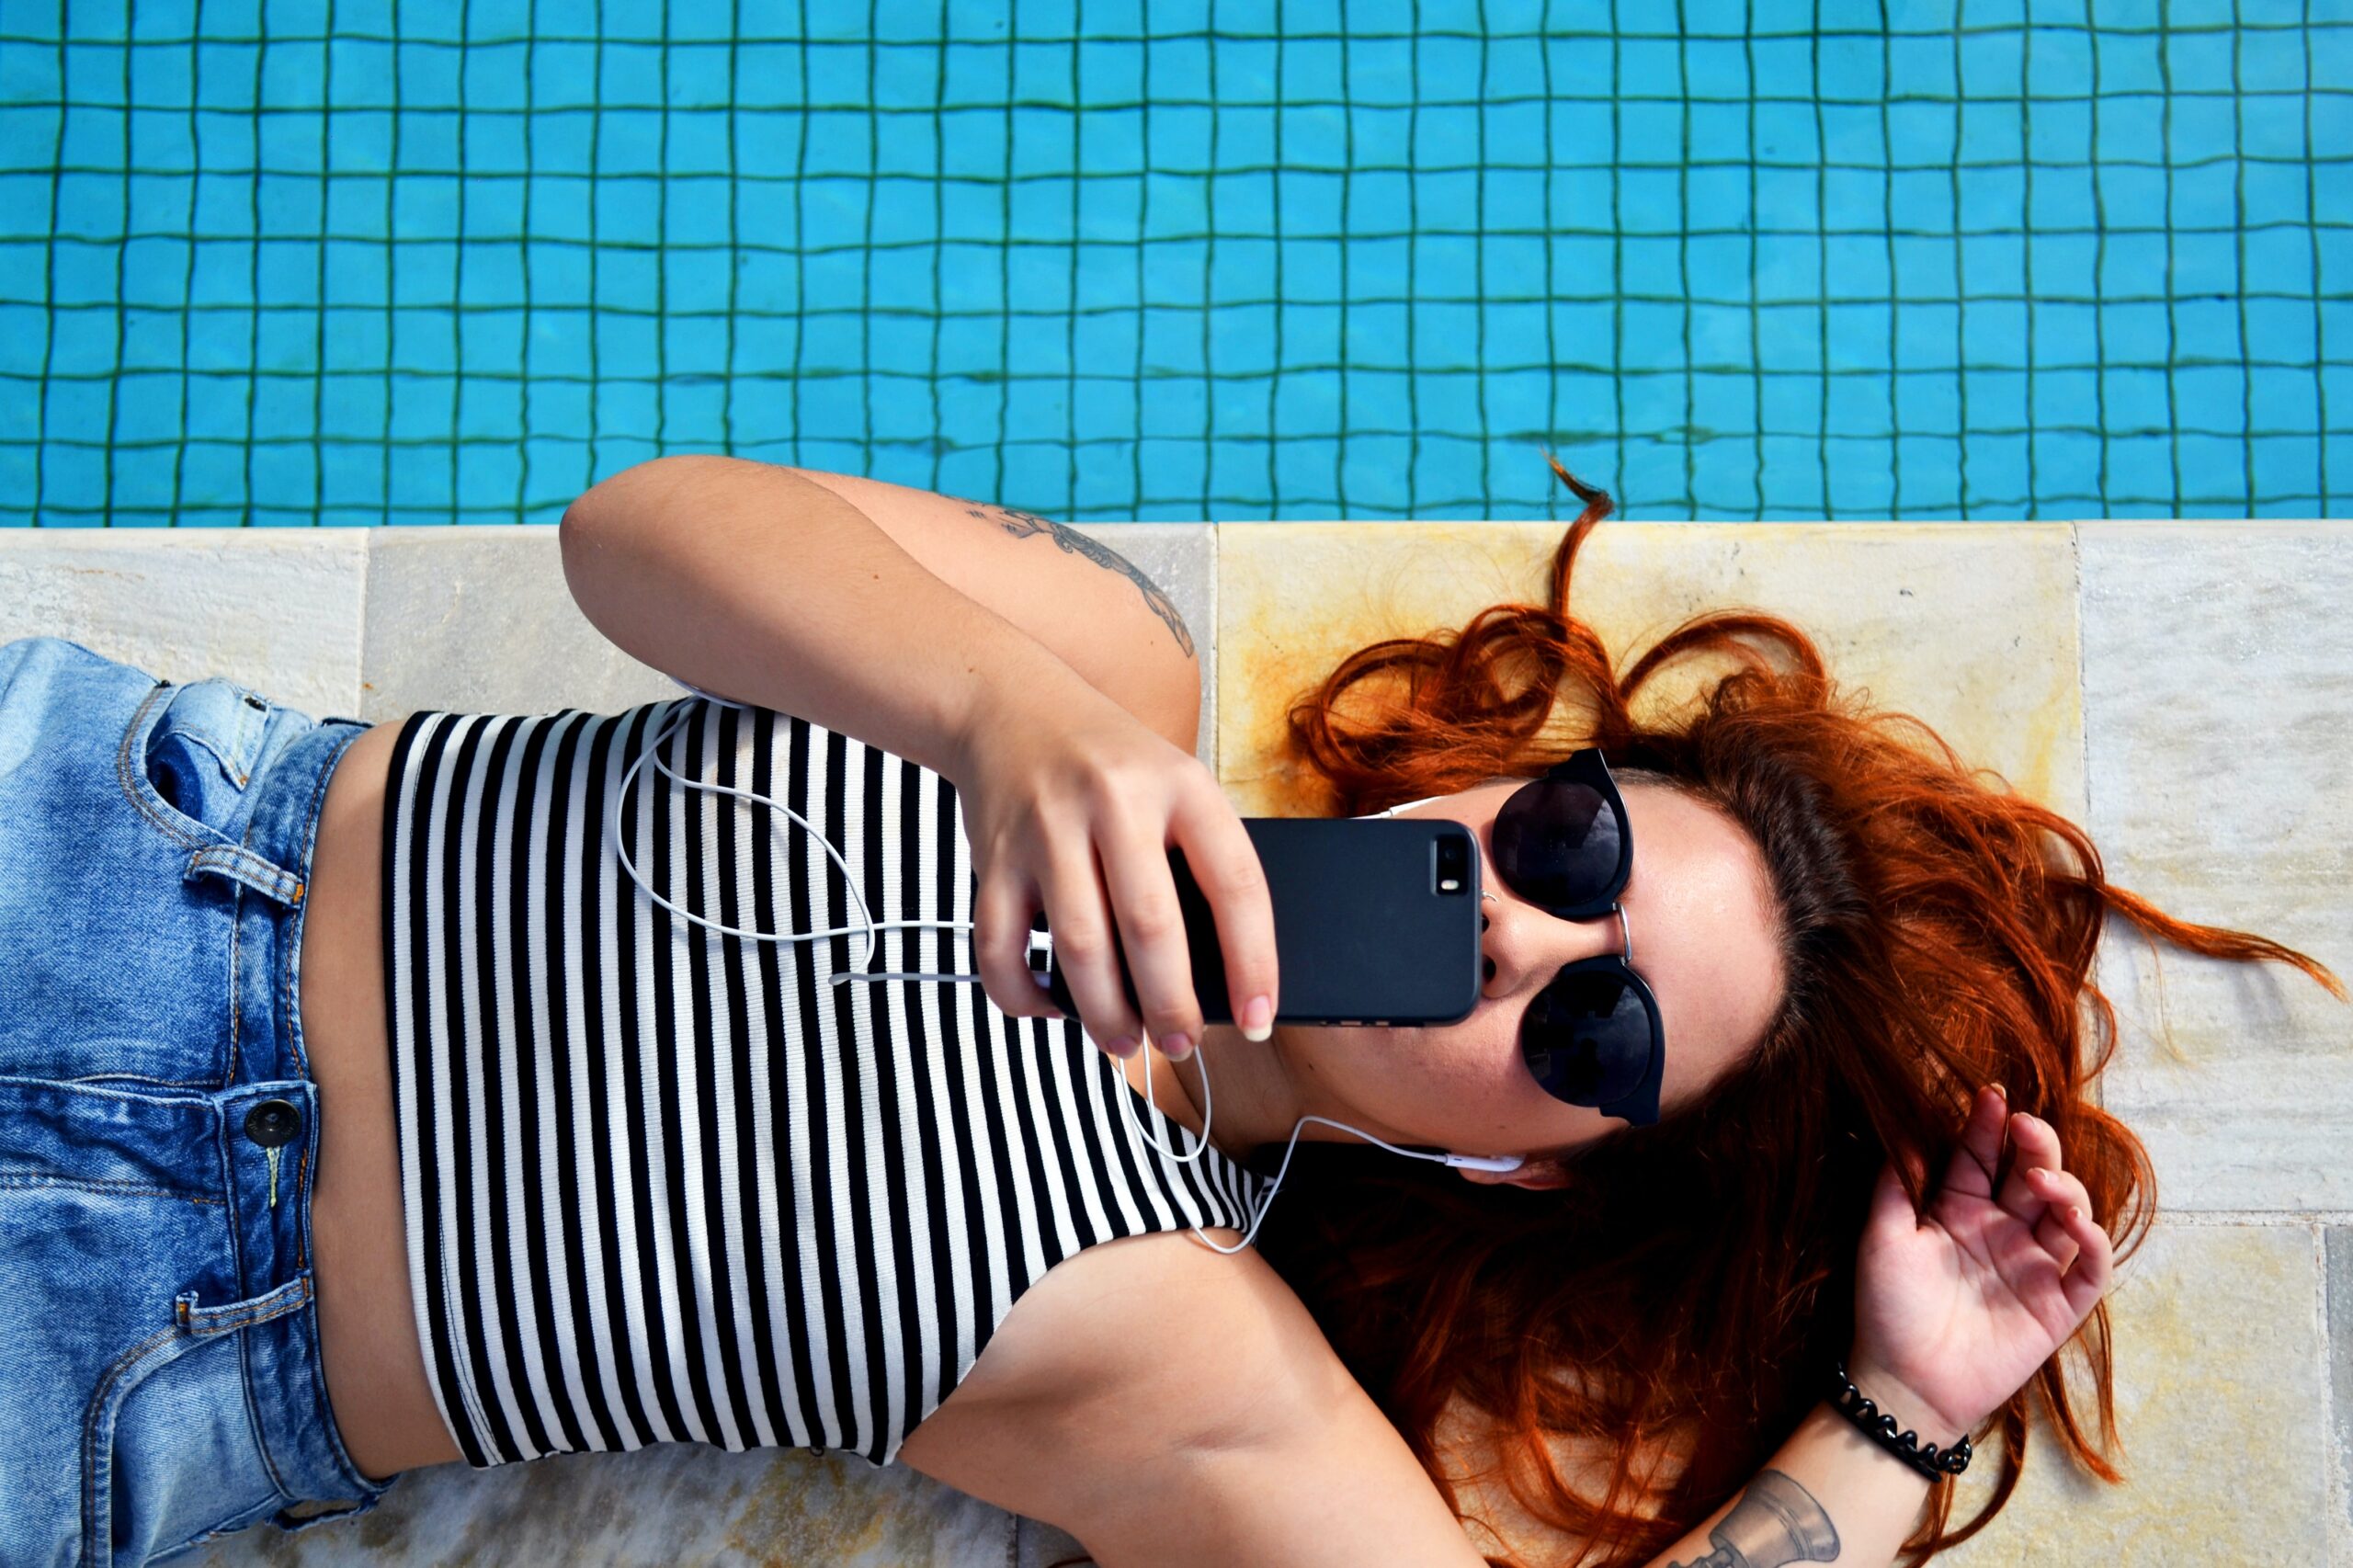 Girl laying by a pool using a phone to scroll and listen to music